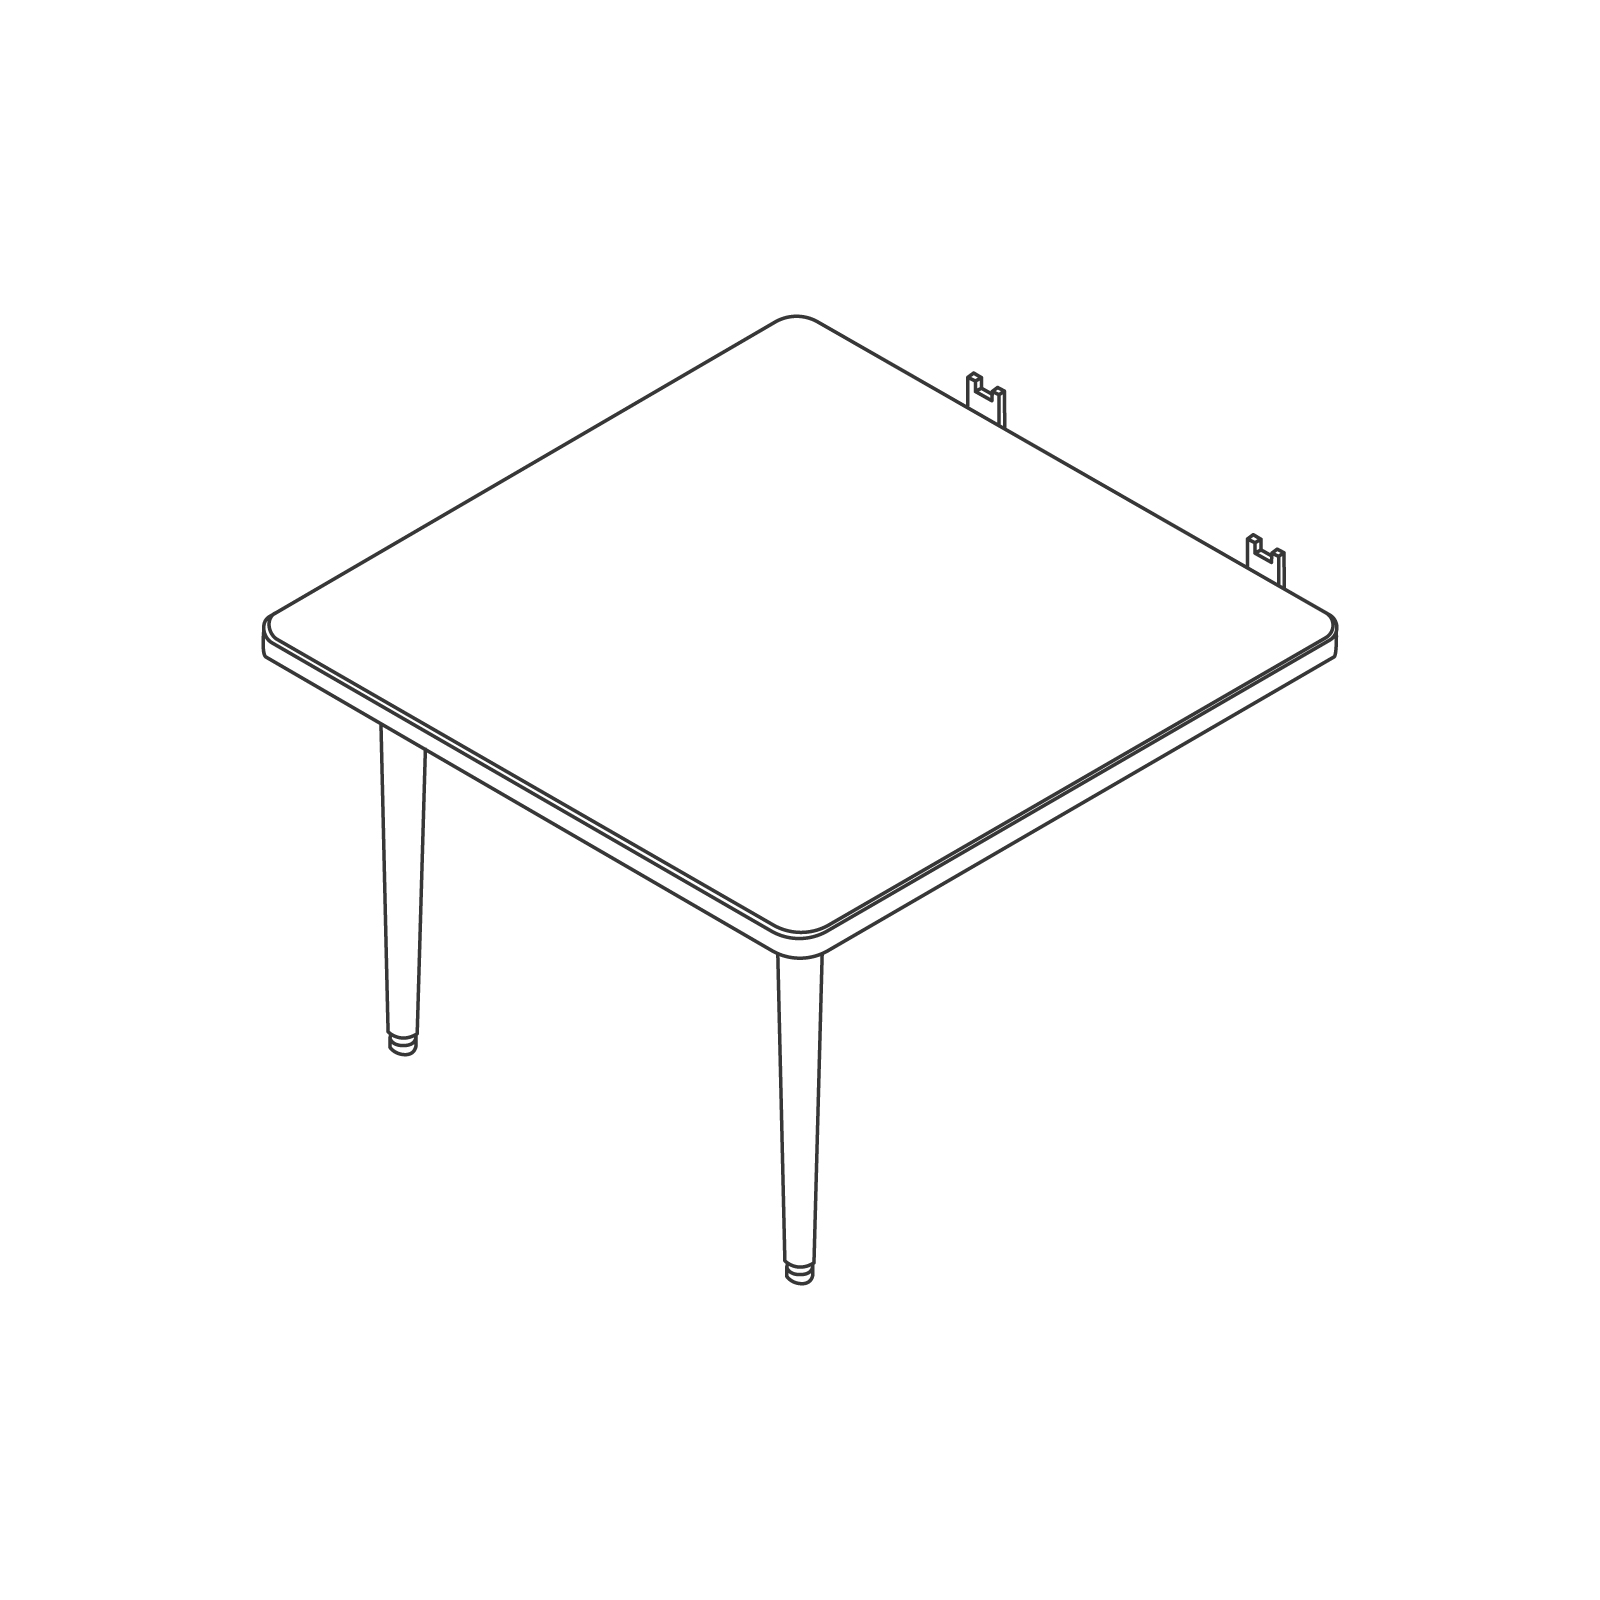 A line drawing - Nemschoff Palisade Multiple Seating–Corner Table